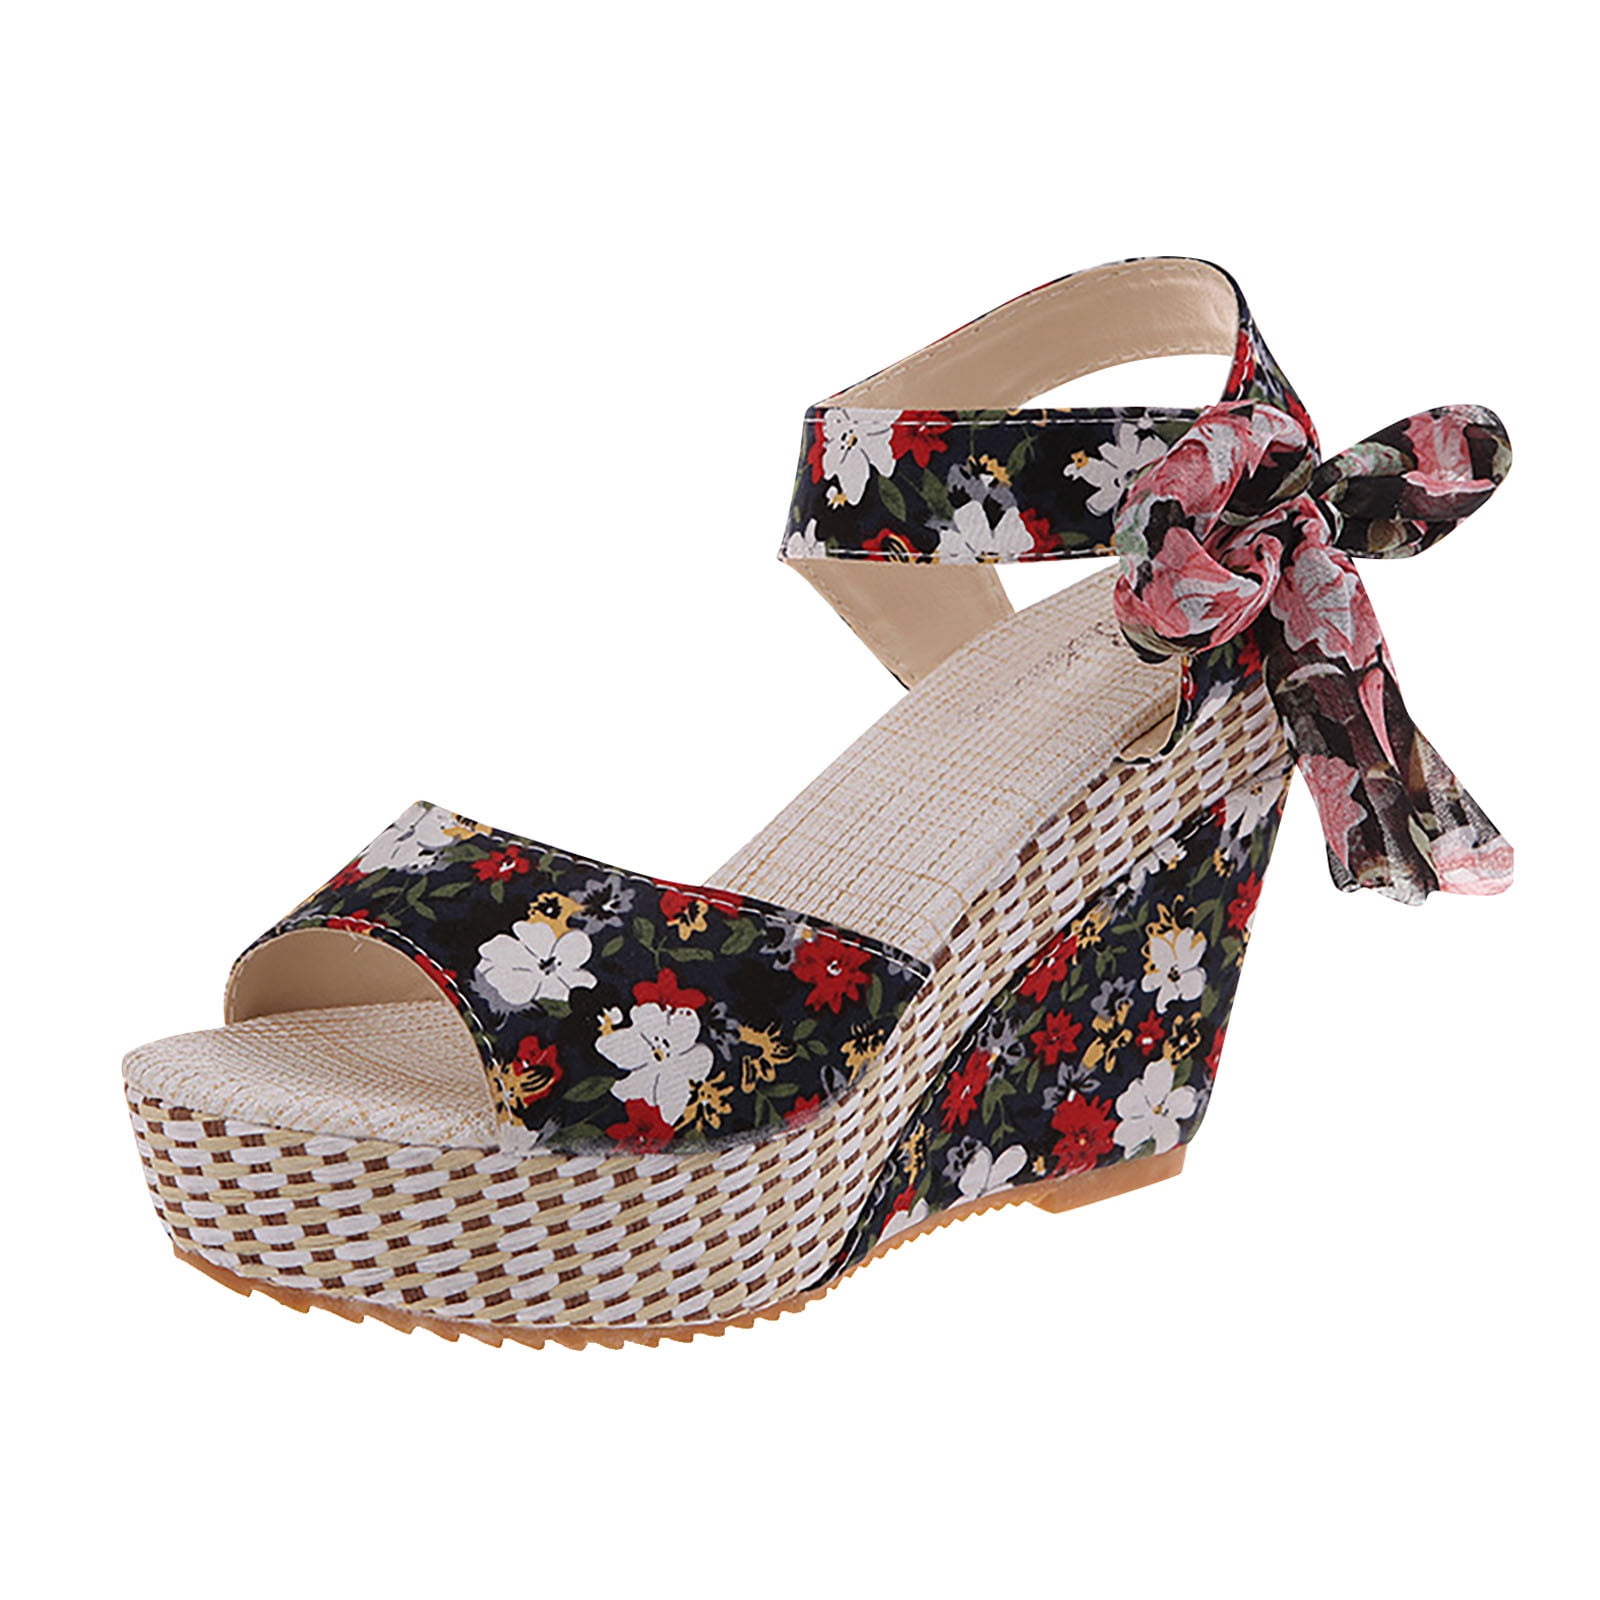 Summer Wedge Sandals For Women Peep Toe Platform Shoes With Soft Bottom  Platform Wedge Heels And Platform Sole Stylish Footwear From  Himalayasstore, $17.01